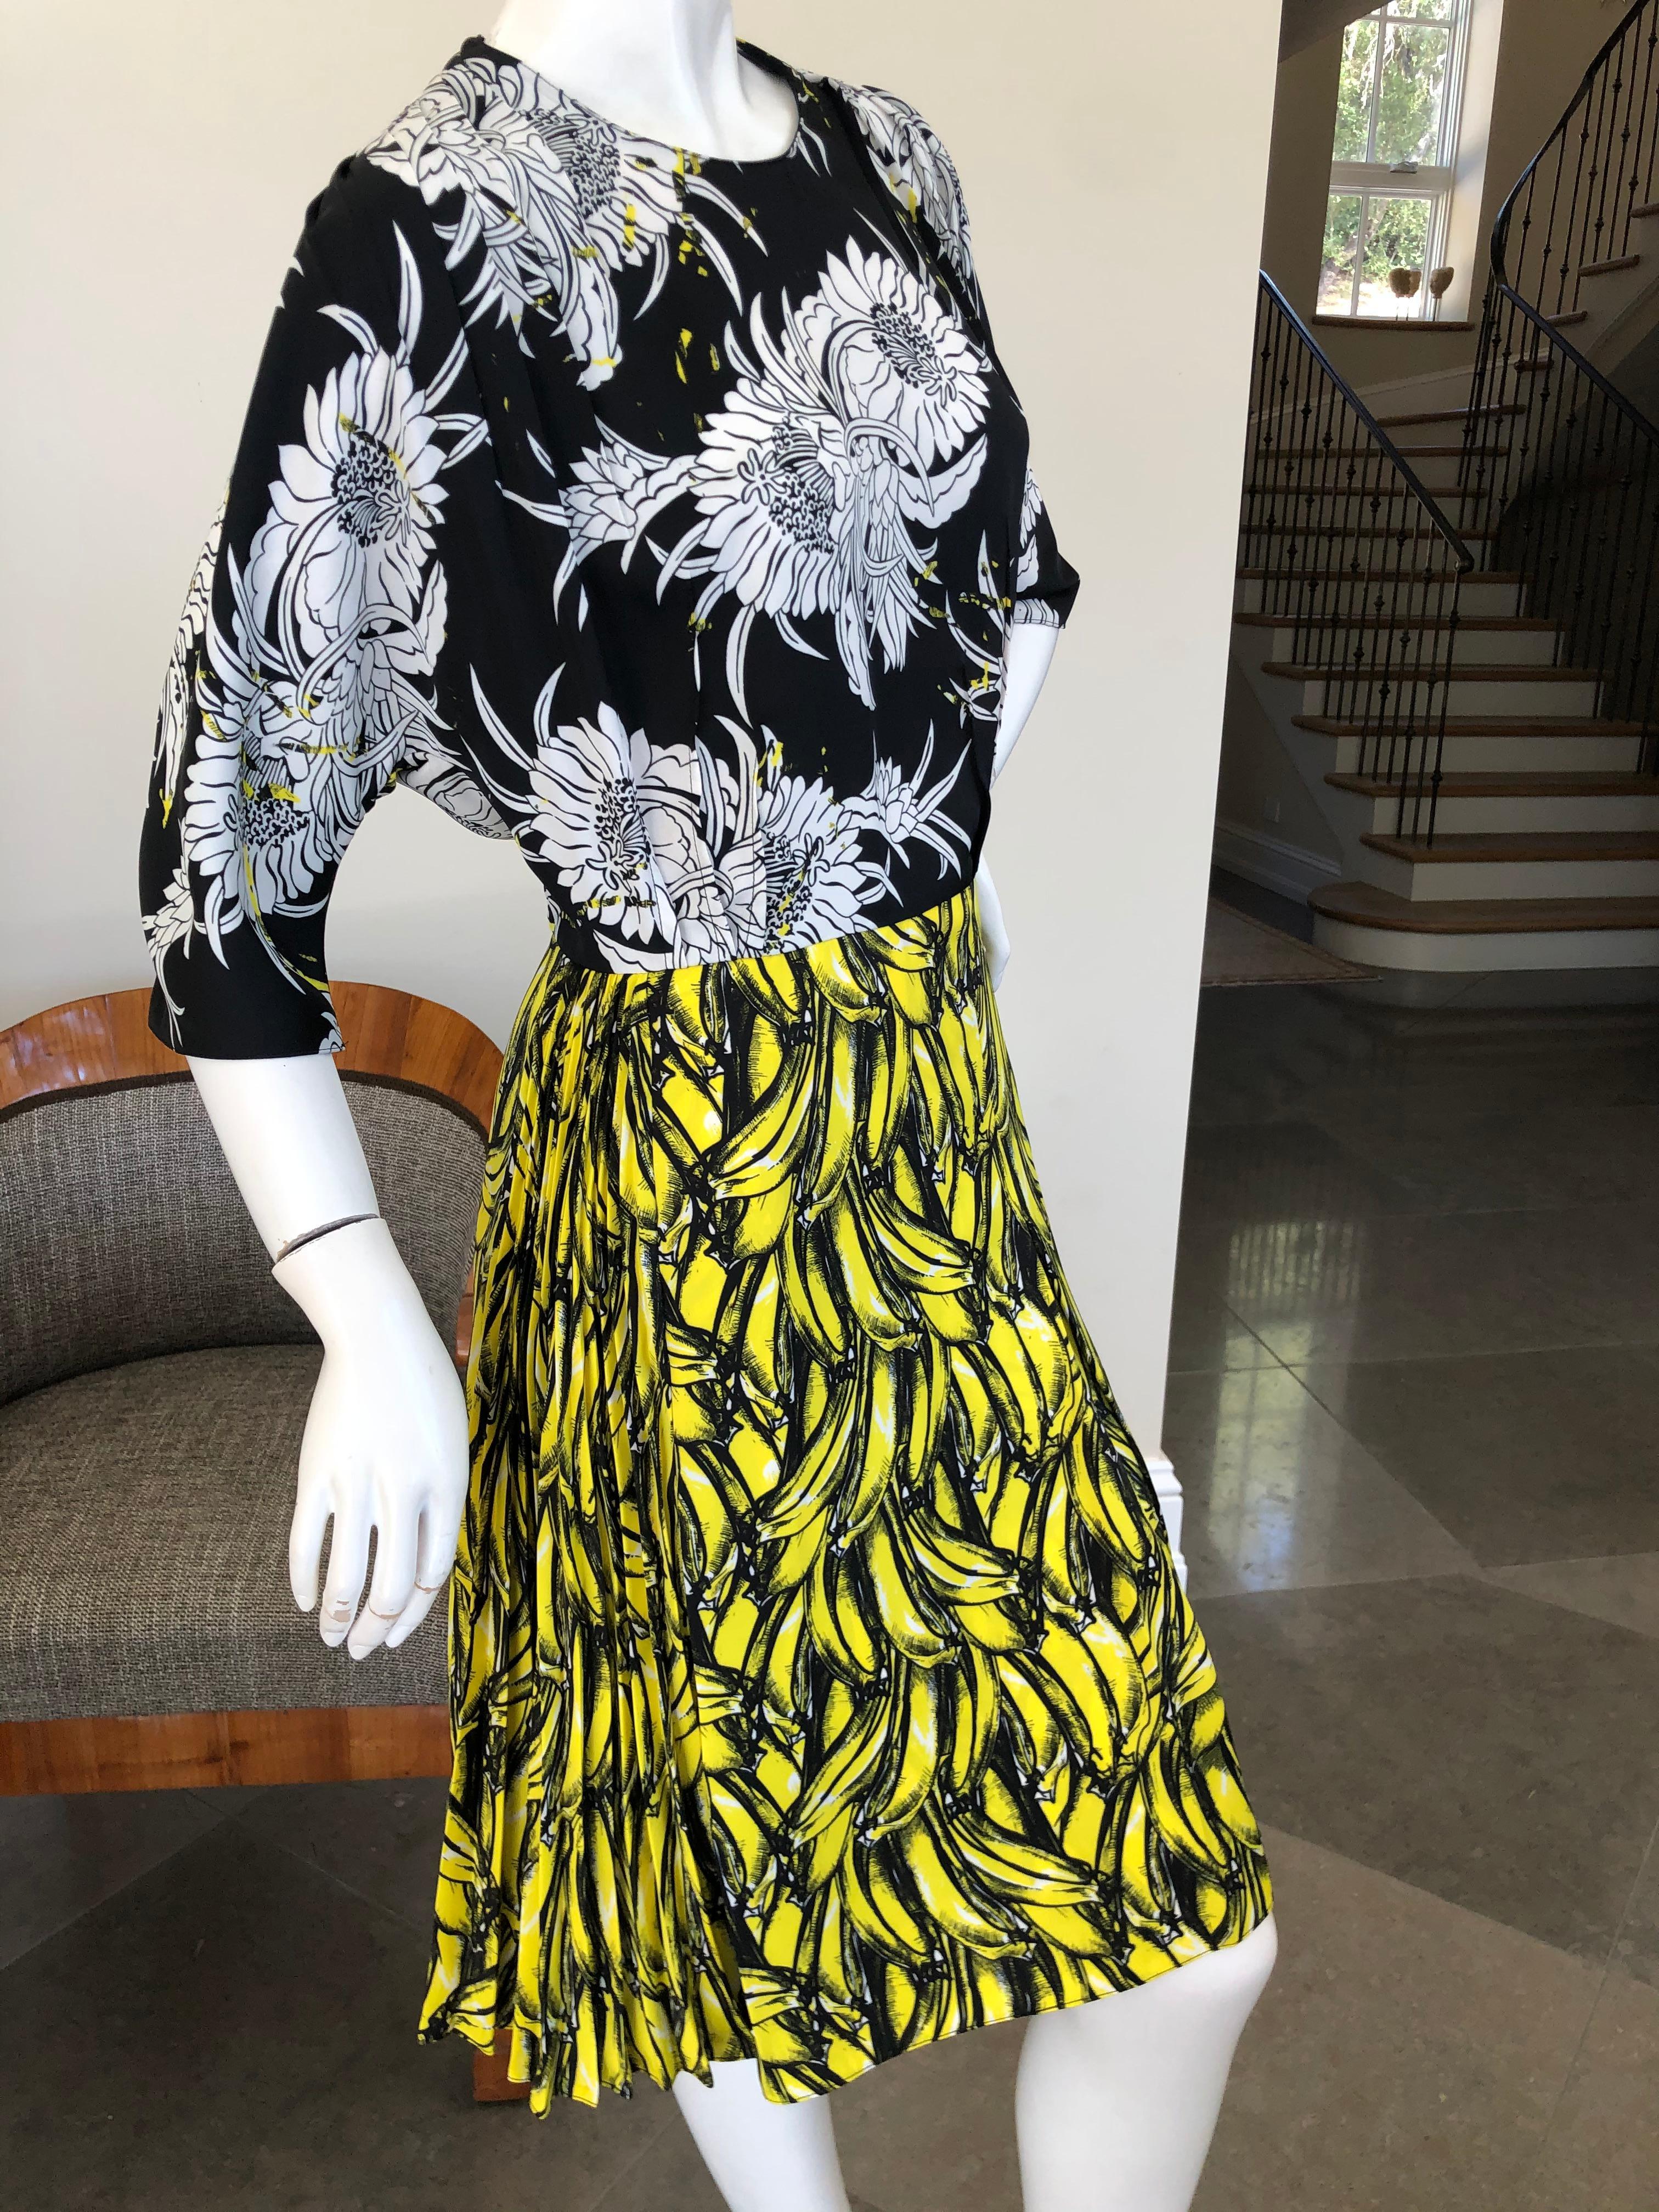 Prada Banana and Dahlia Print Dress with Pleated Accents A/W 2018 In Excellent Condition For Sale In Cloverdale, CA